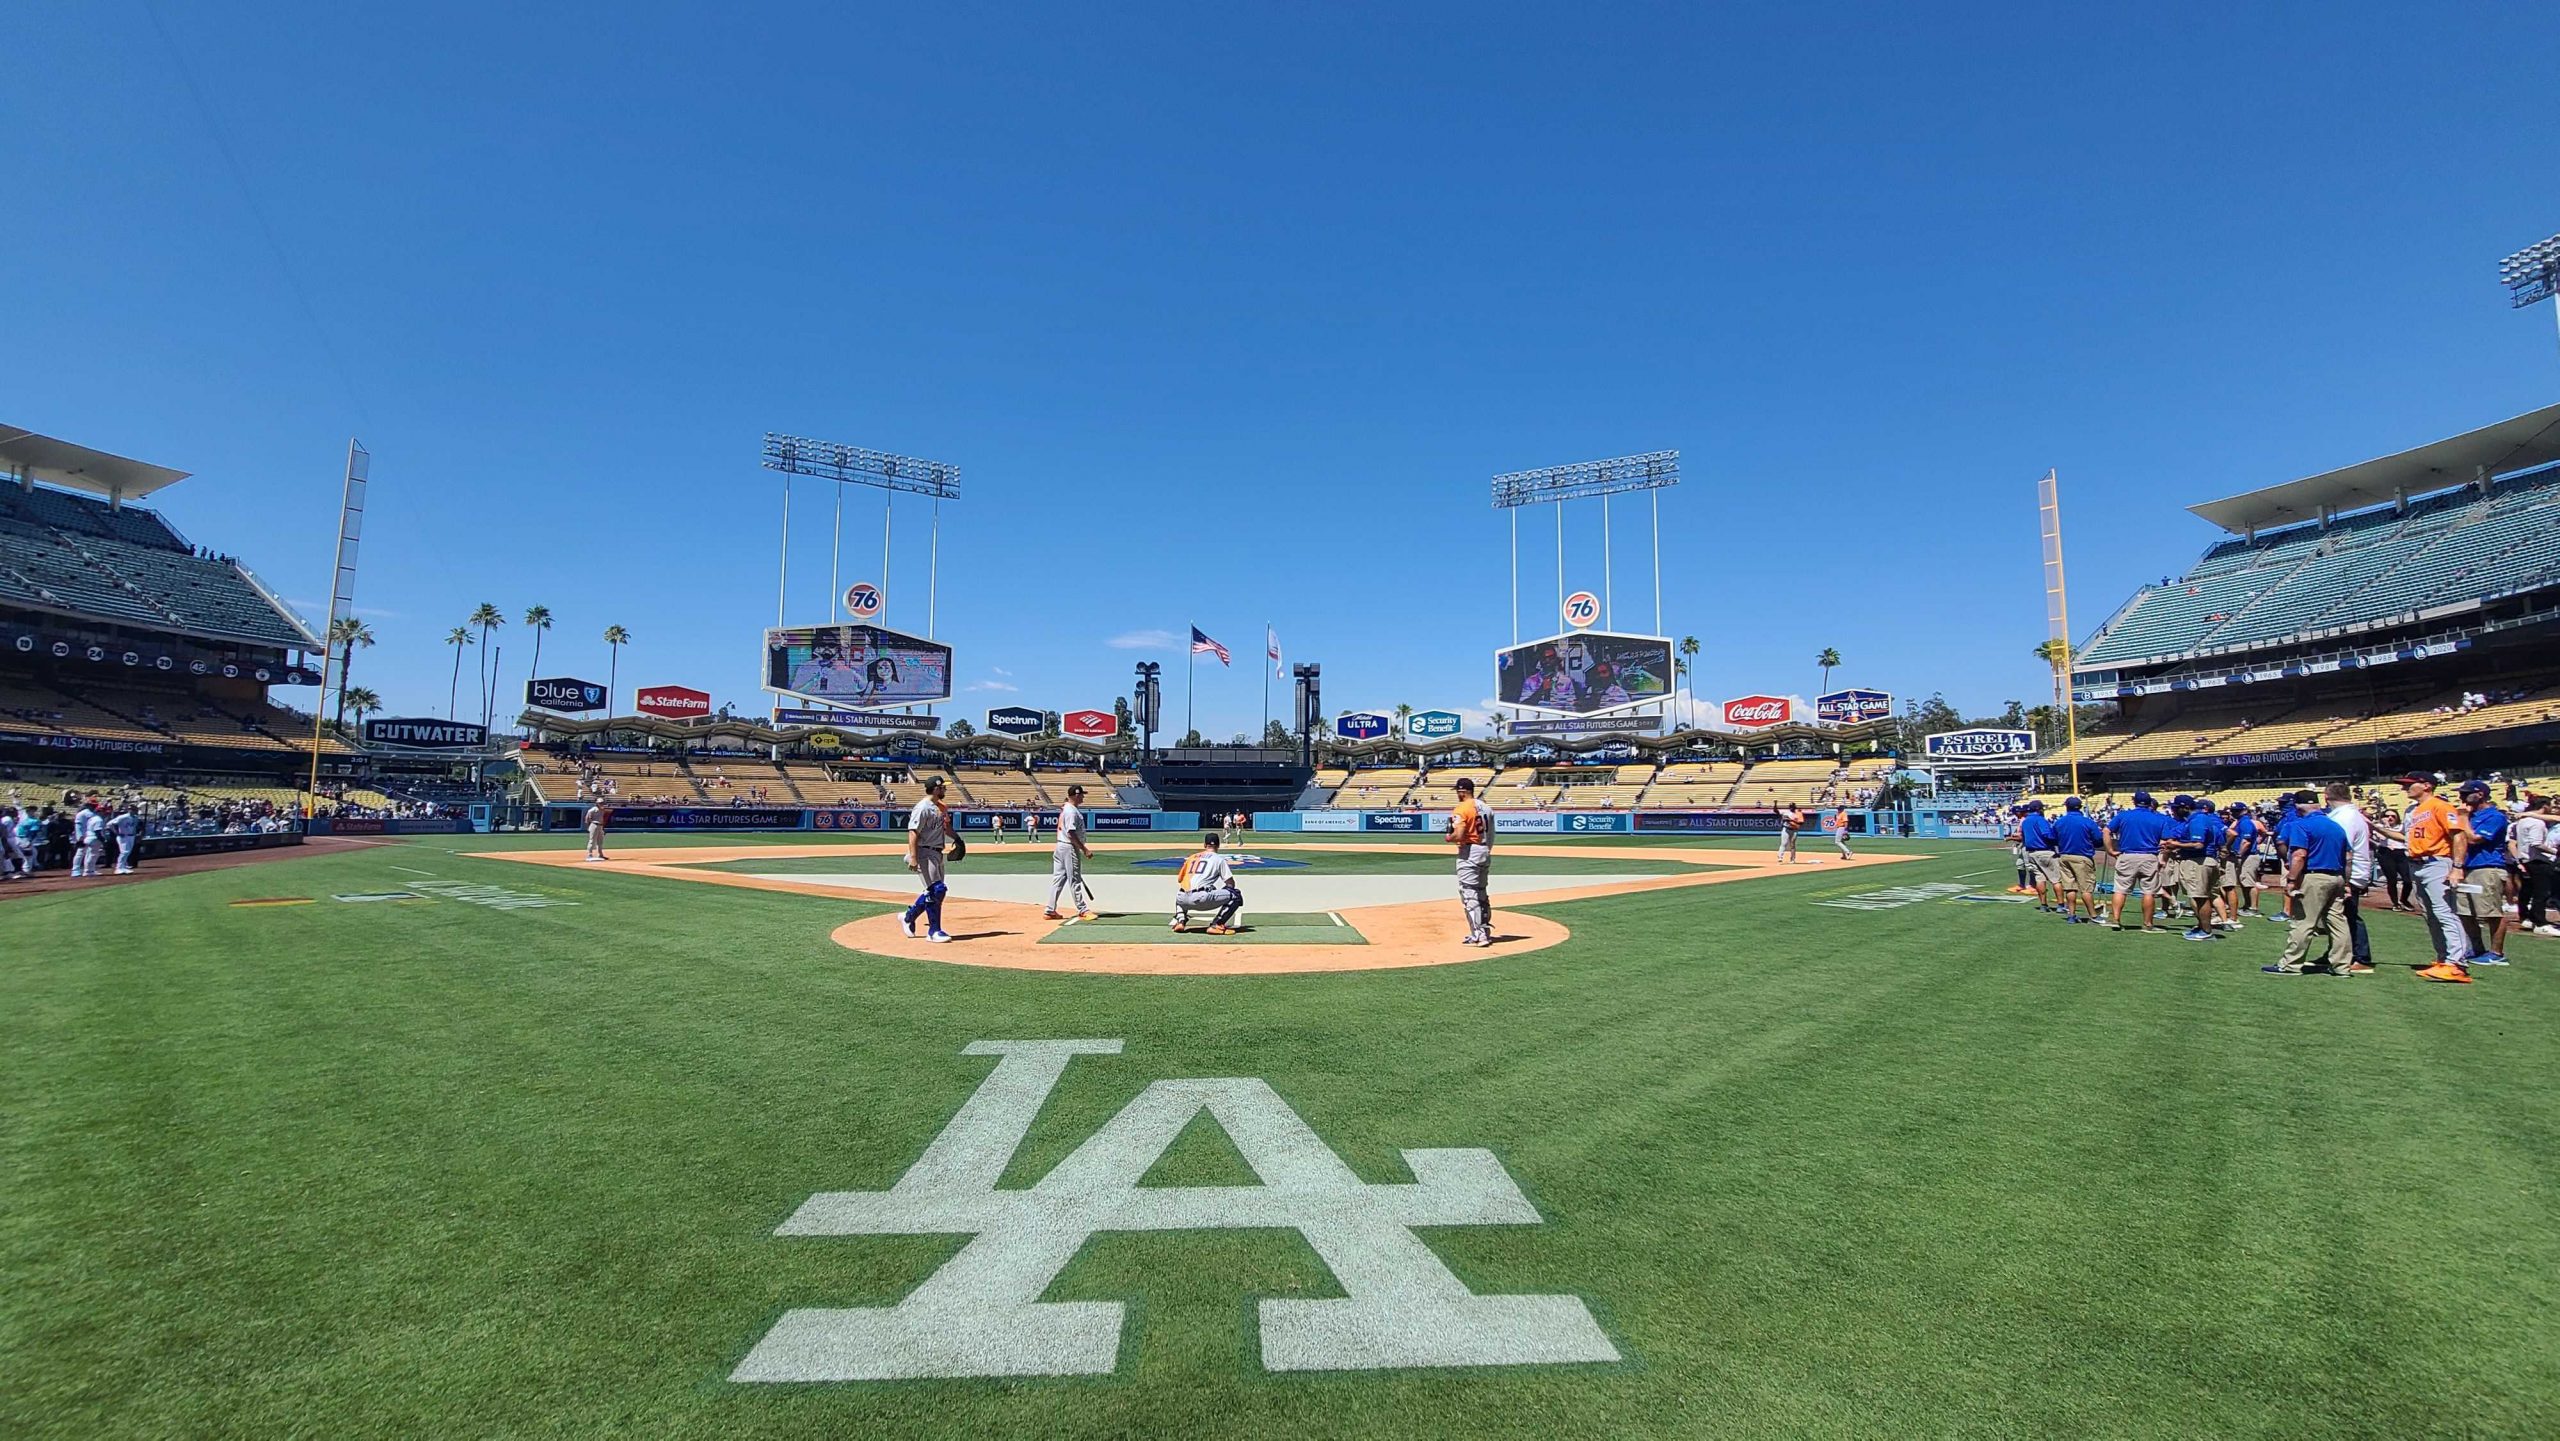 How To Watch Live Stream Of 2022 MLB Futures Game At Dodger Stadium